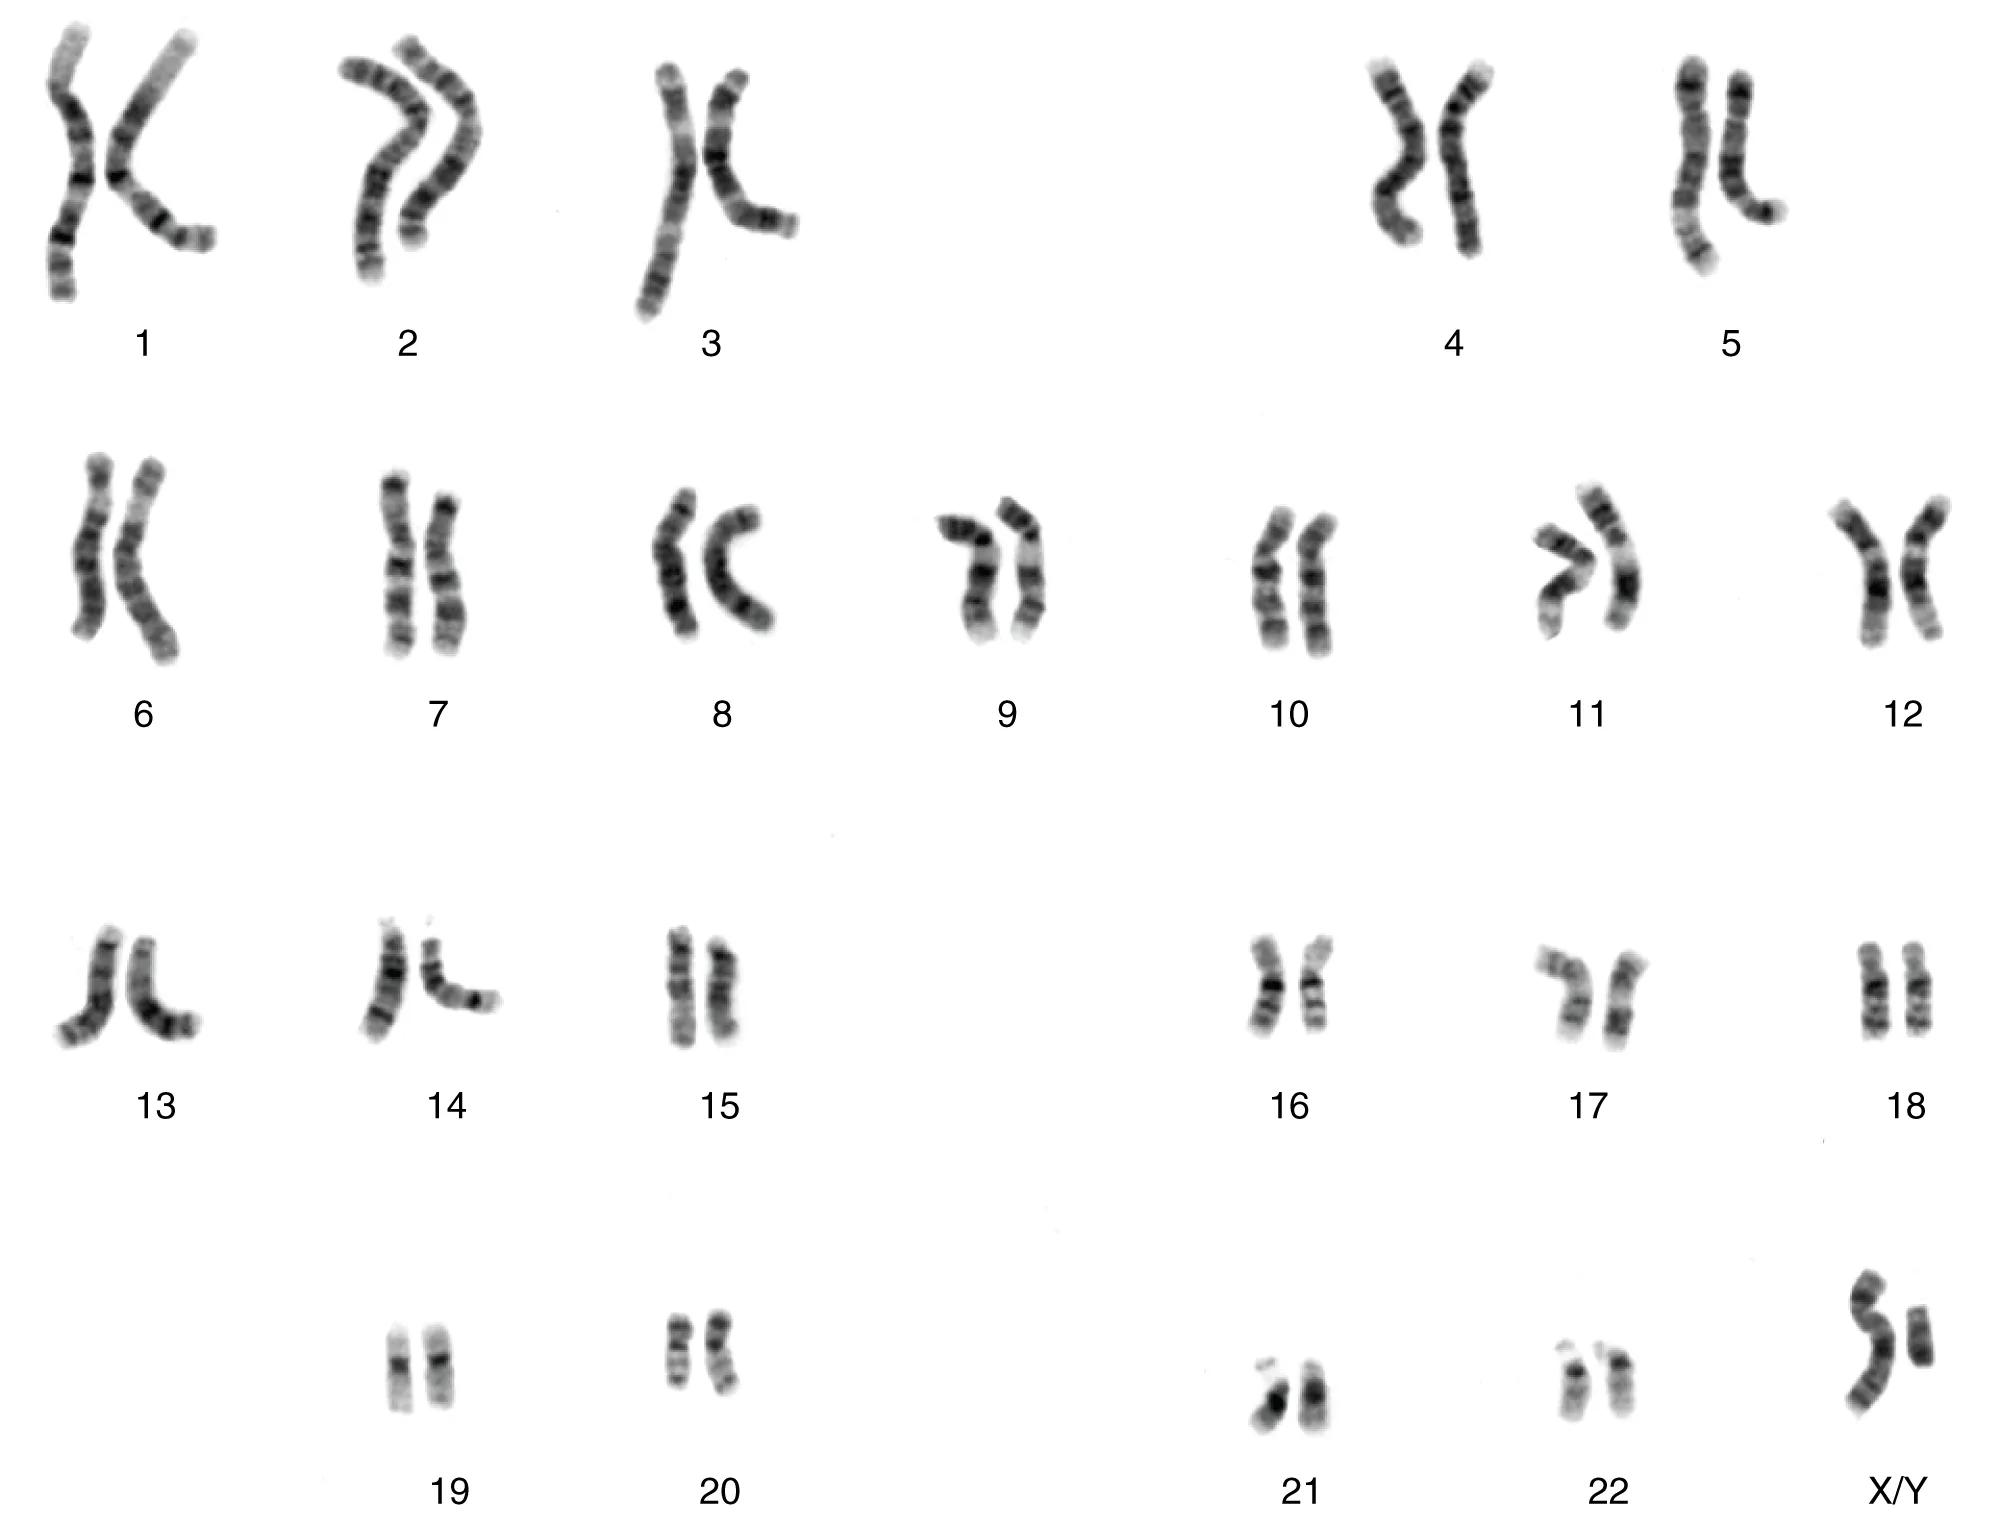 This figure show the 23 pairs of chromosomes in a male human being.